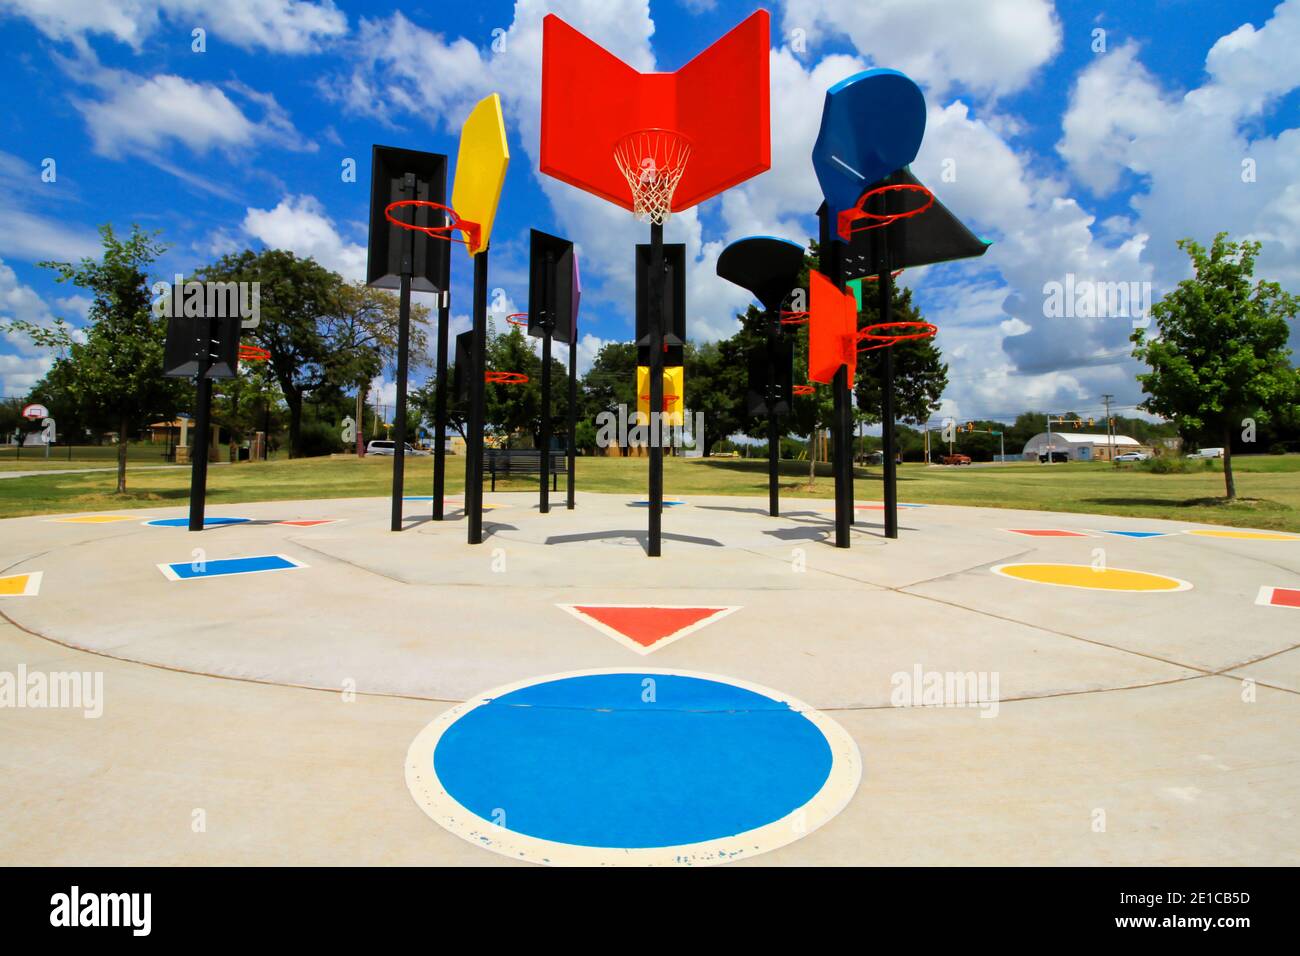 A colorful outdoor basketball court in JF Kennedy Park in Oklahoma City. Stock Photo